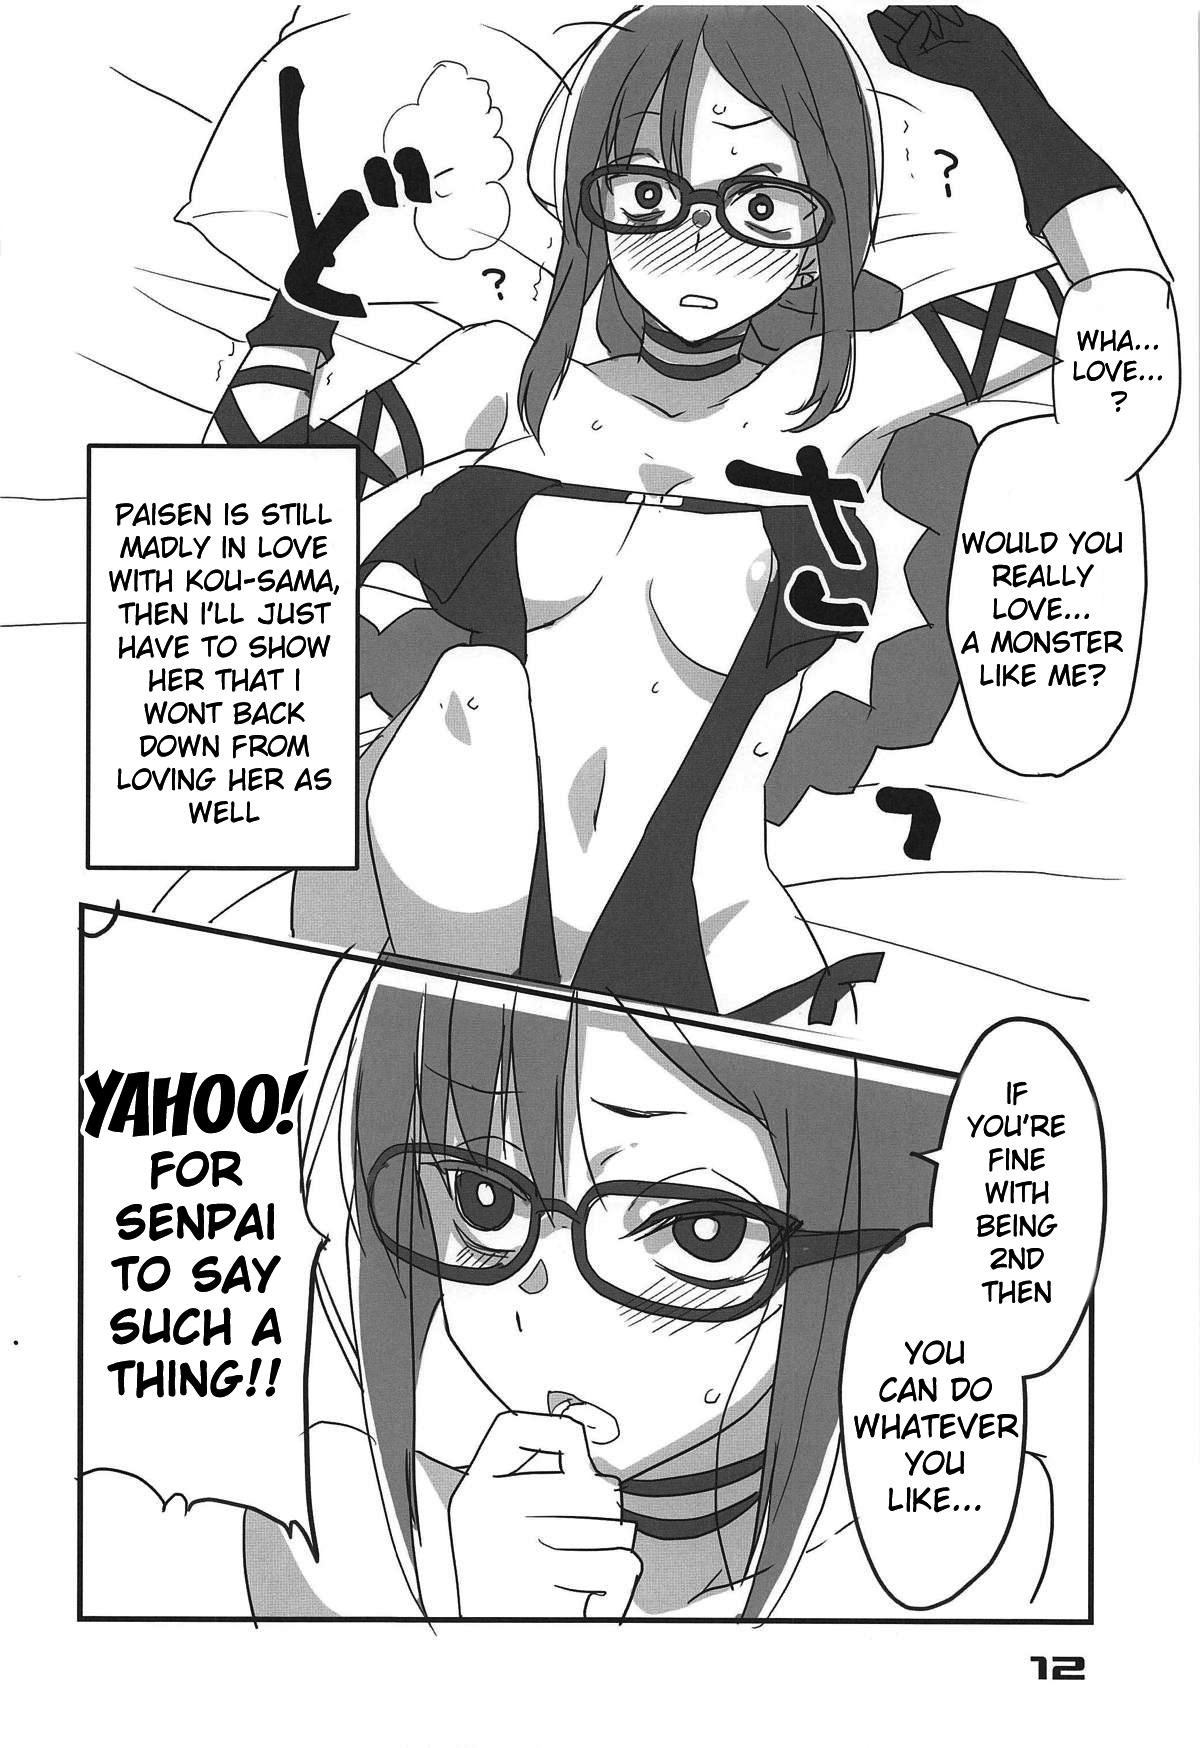 Super Hot Porn Paisen Souiu Toko! - Fate grand order Omegle - Page 11